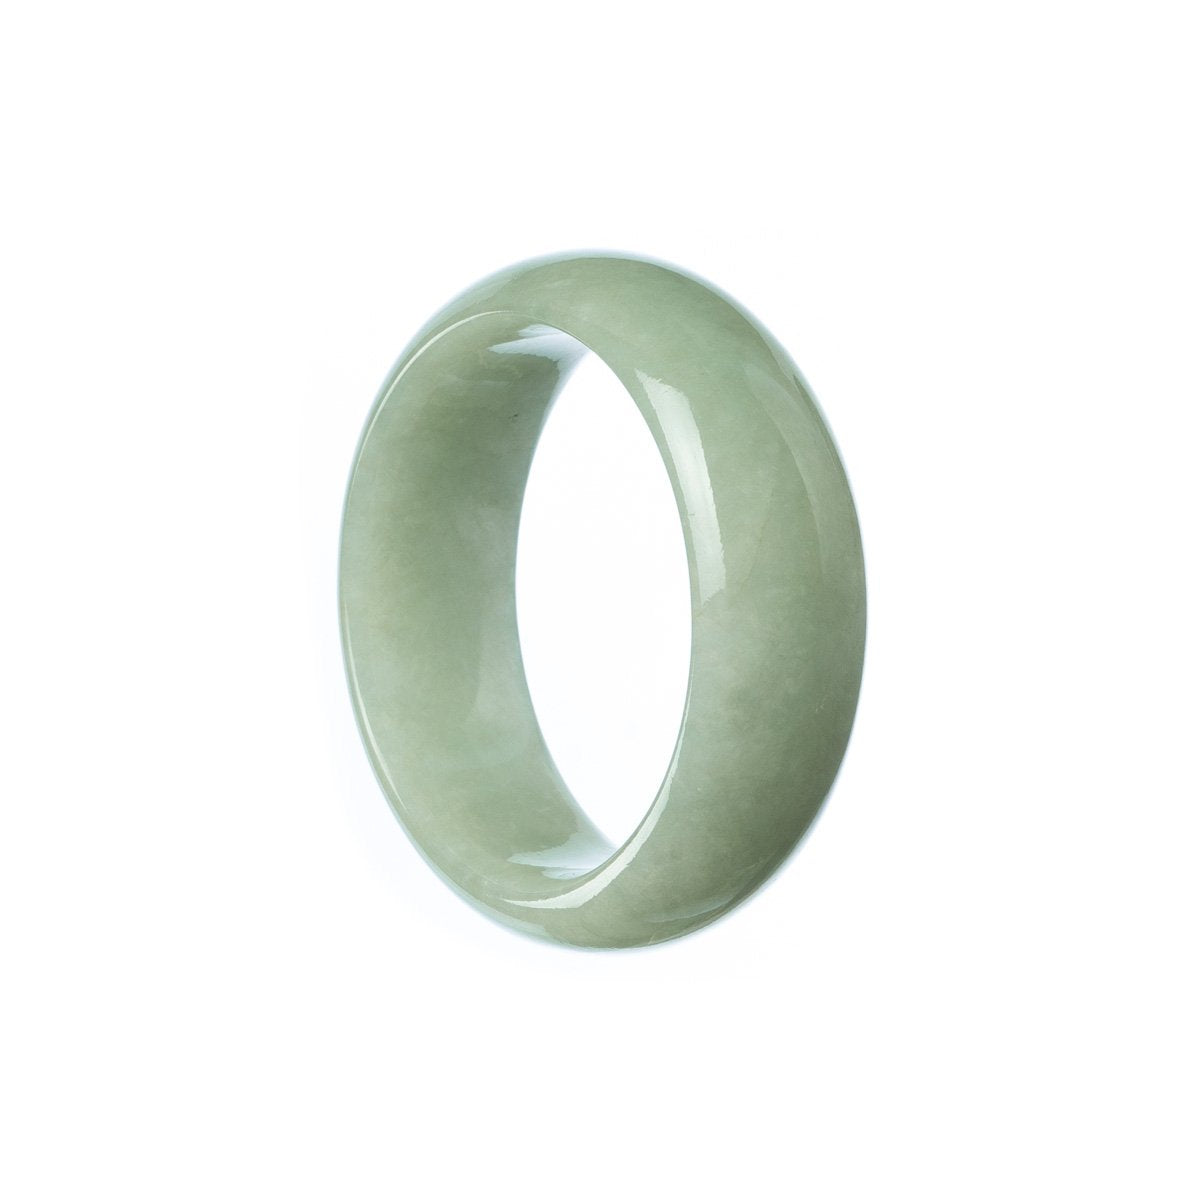 A delicate green jade bracelet with a half moon design, specially crafted for children.